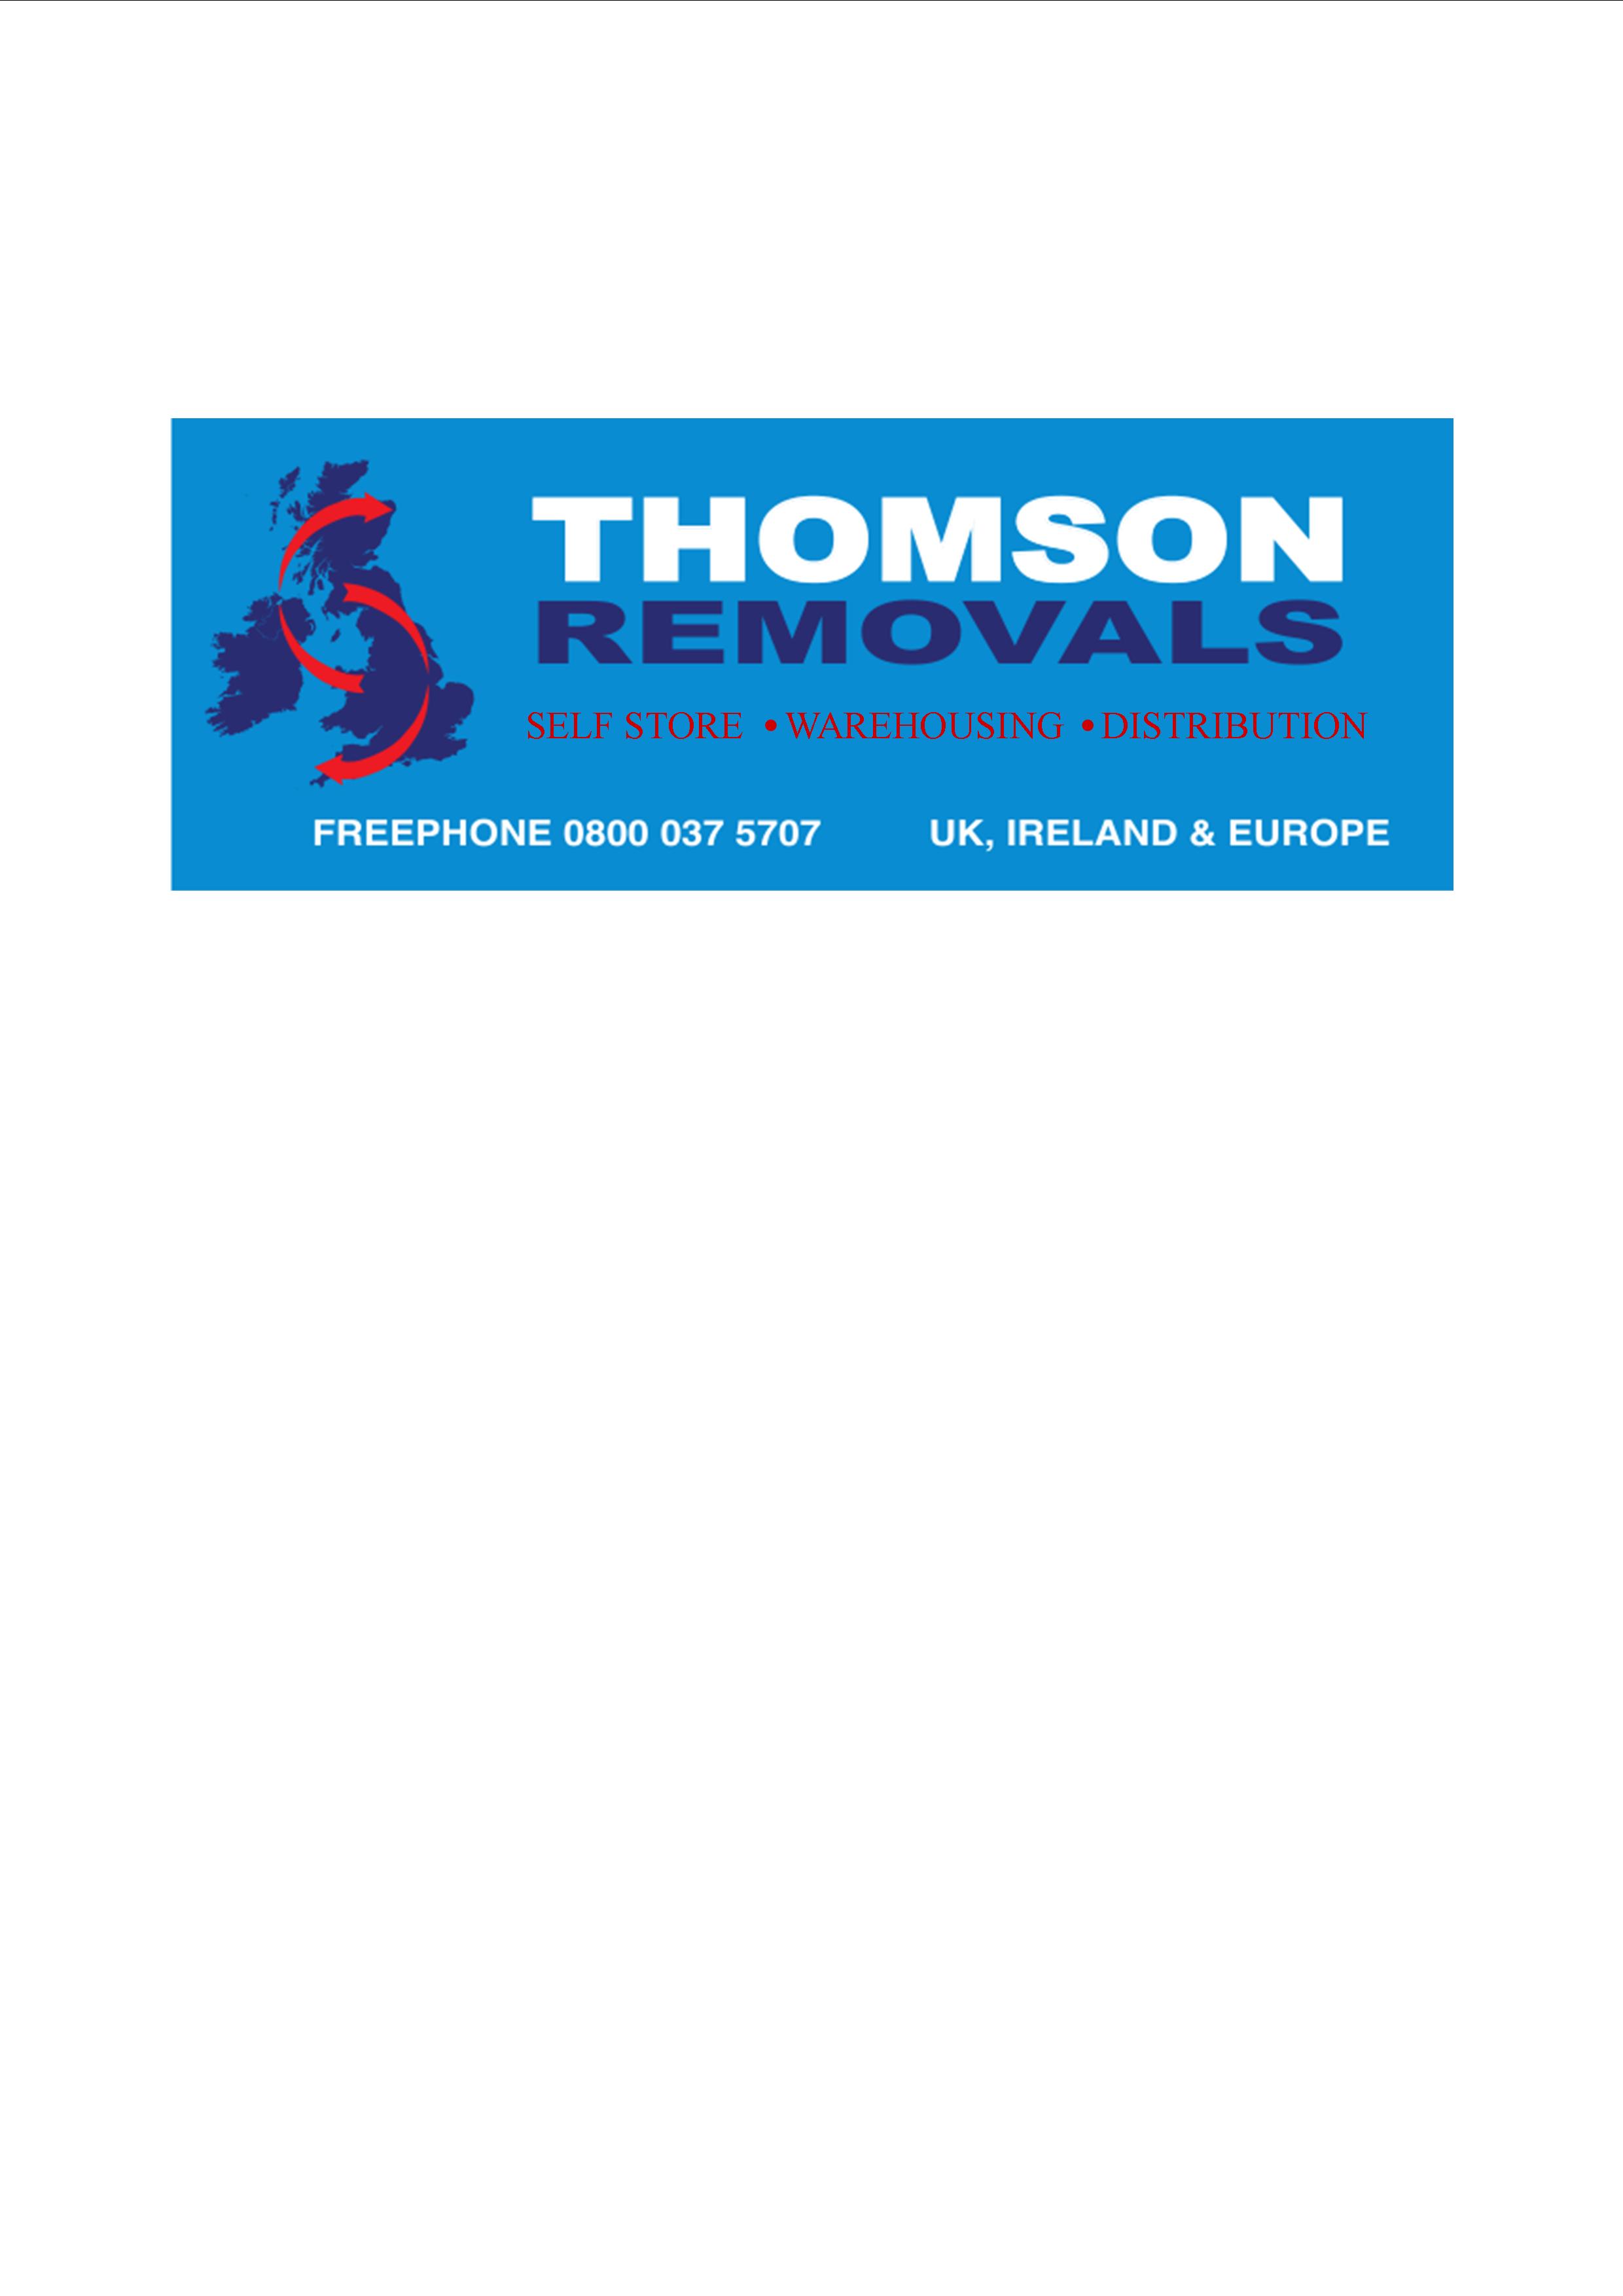 THOMSON REMOVALS AND SELF STORAGE